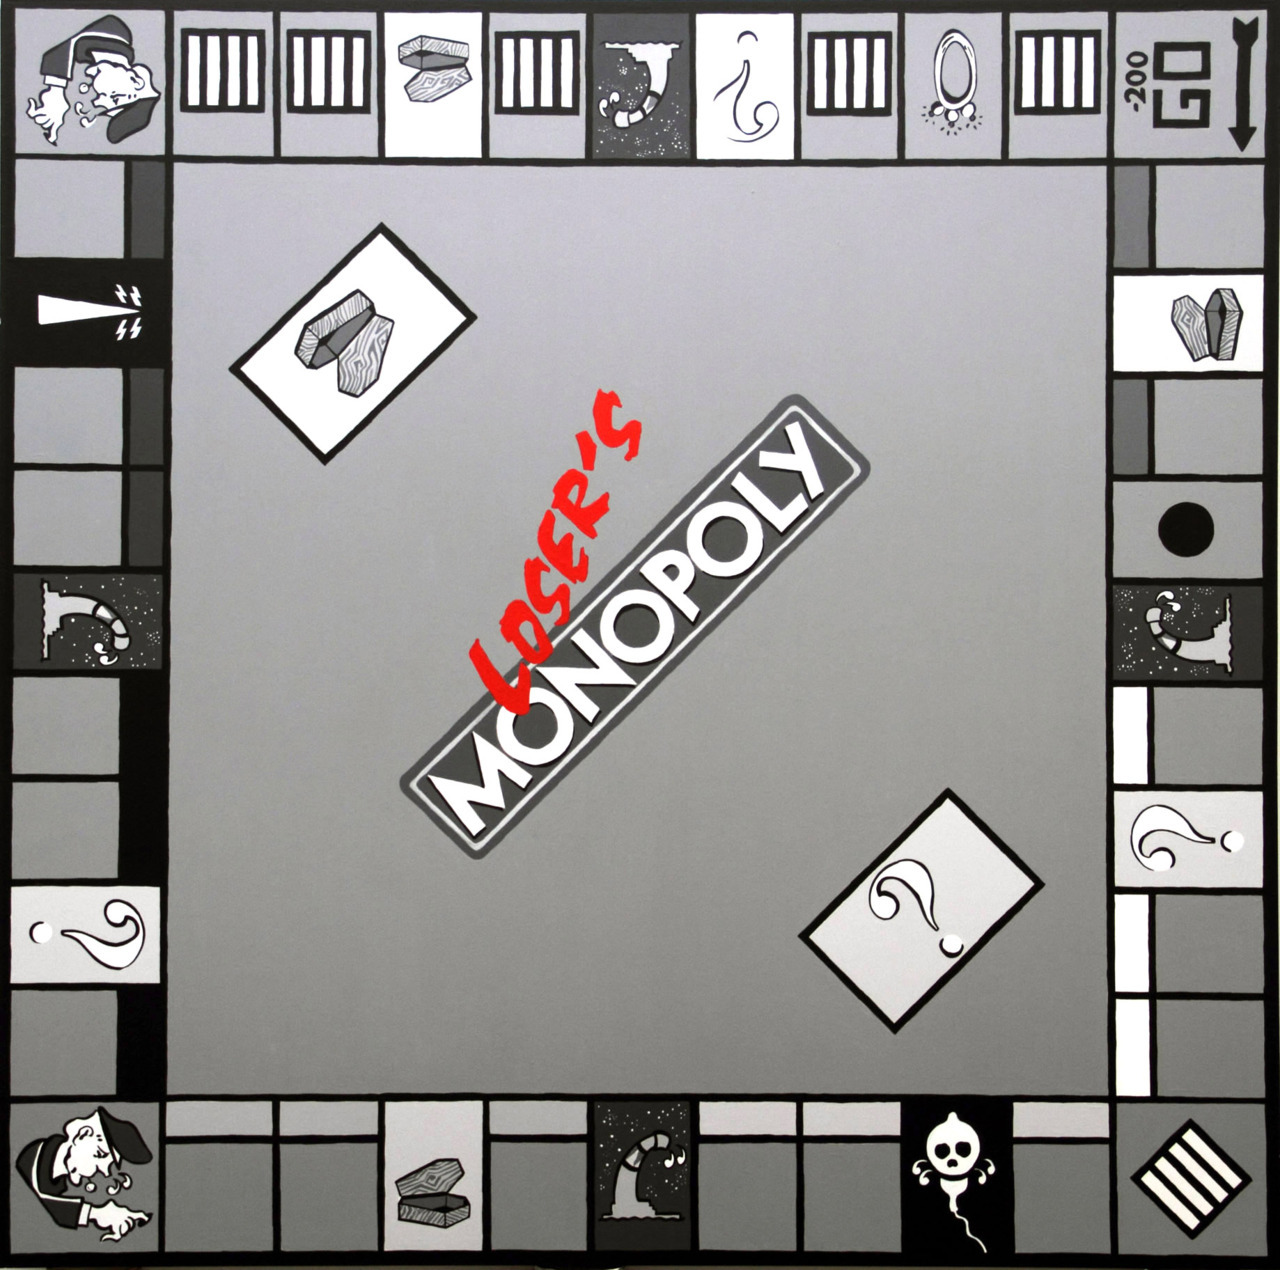 Loser’s Monopoly 2, acrylic on plywood, 2009